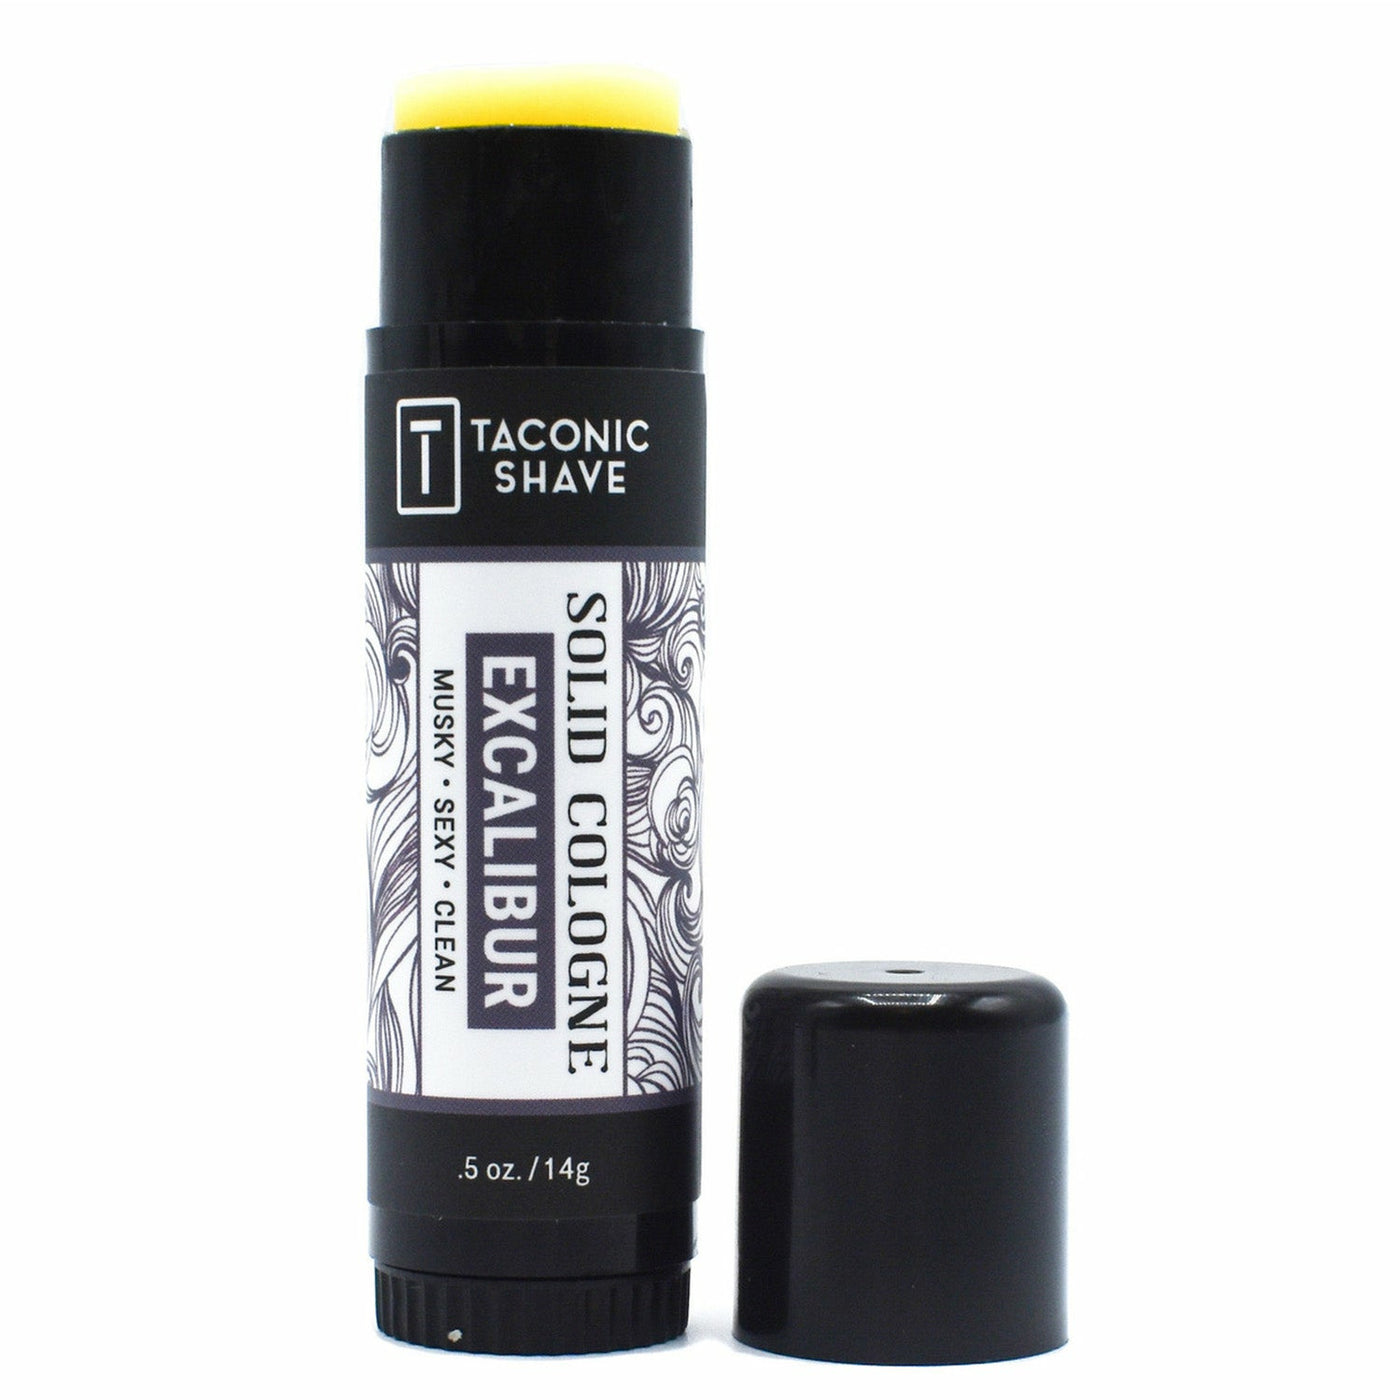  Taconic Shave Excalibur Solid Cologne by Taconic Shave sold by Naked Armor Razors